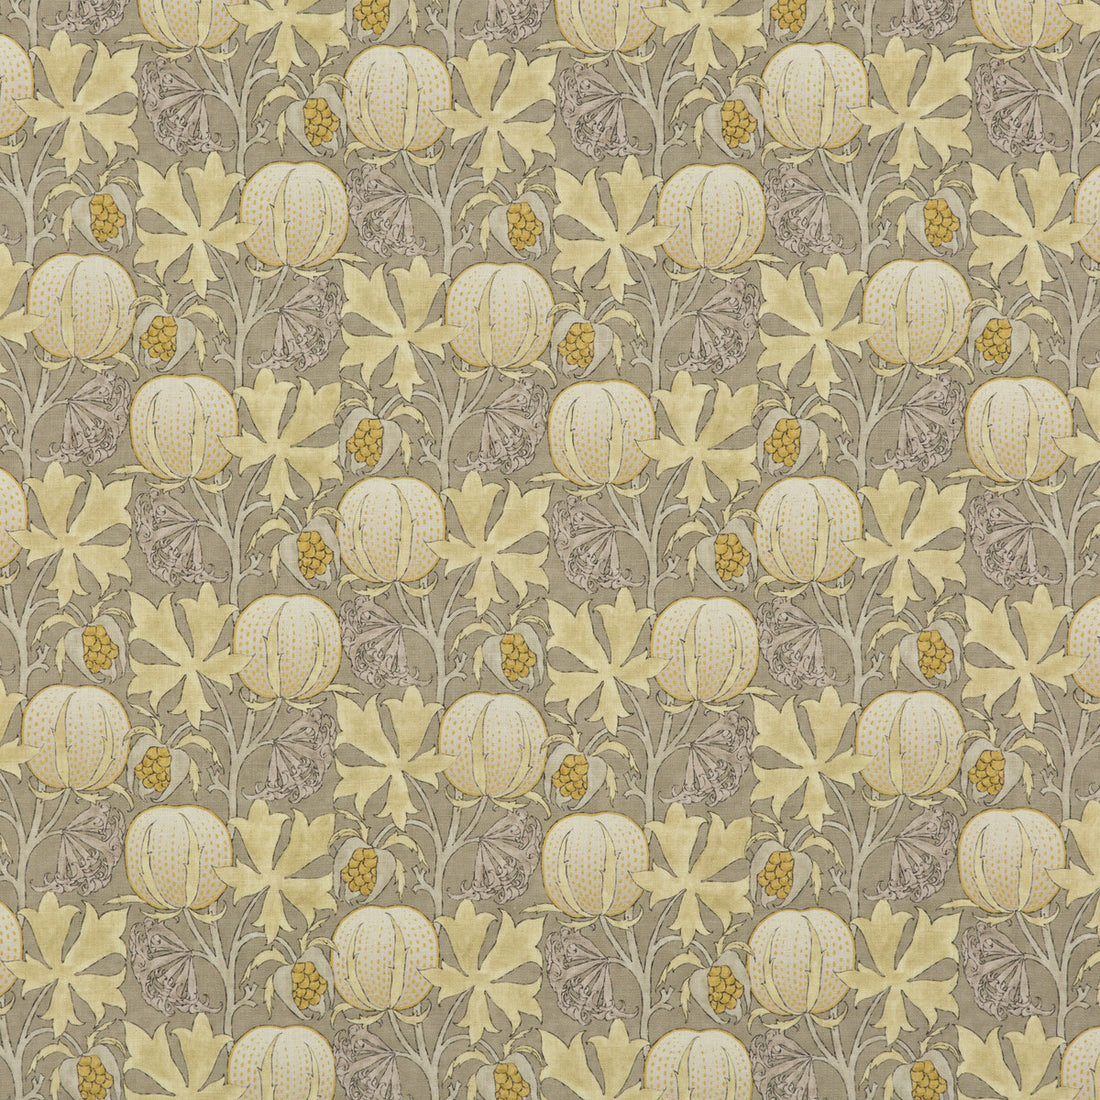 Pumpkins fabric in grey/ochre color - pattern BP10621.4.0 - by G P &amp; J Baker in the Originals V collection